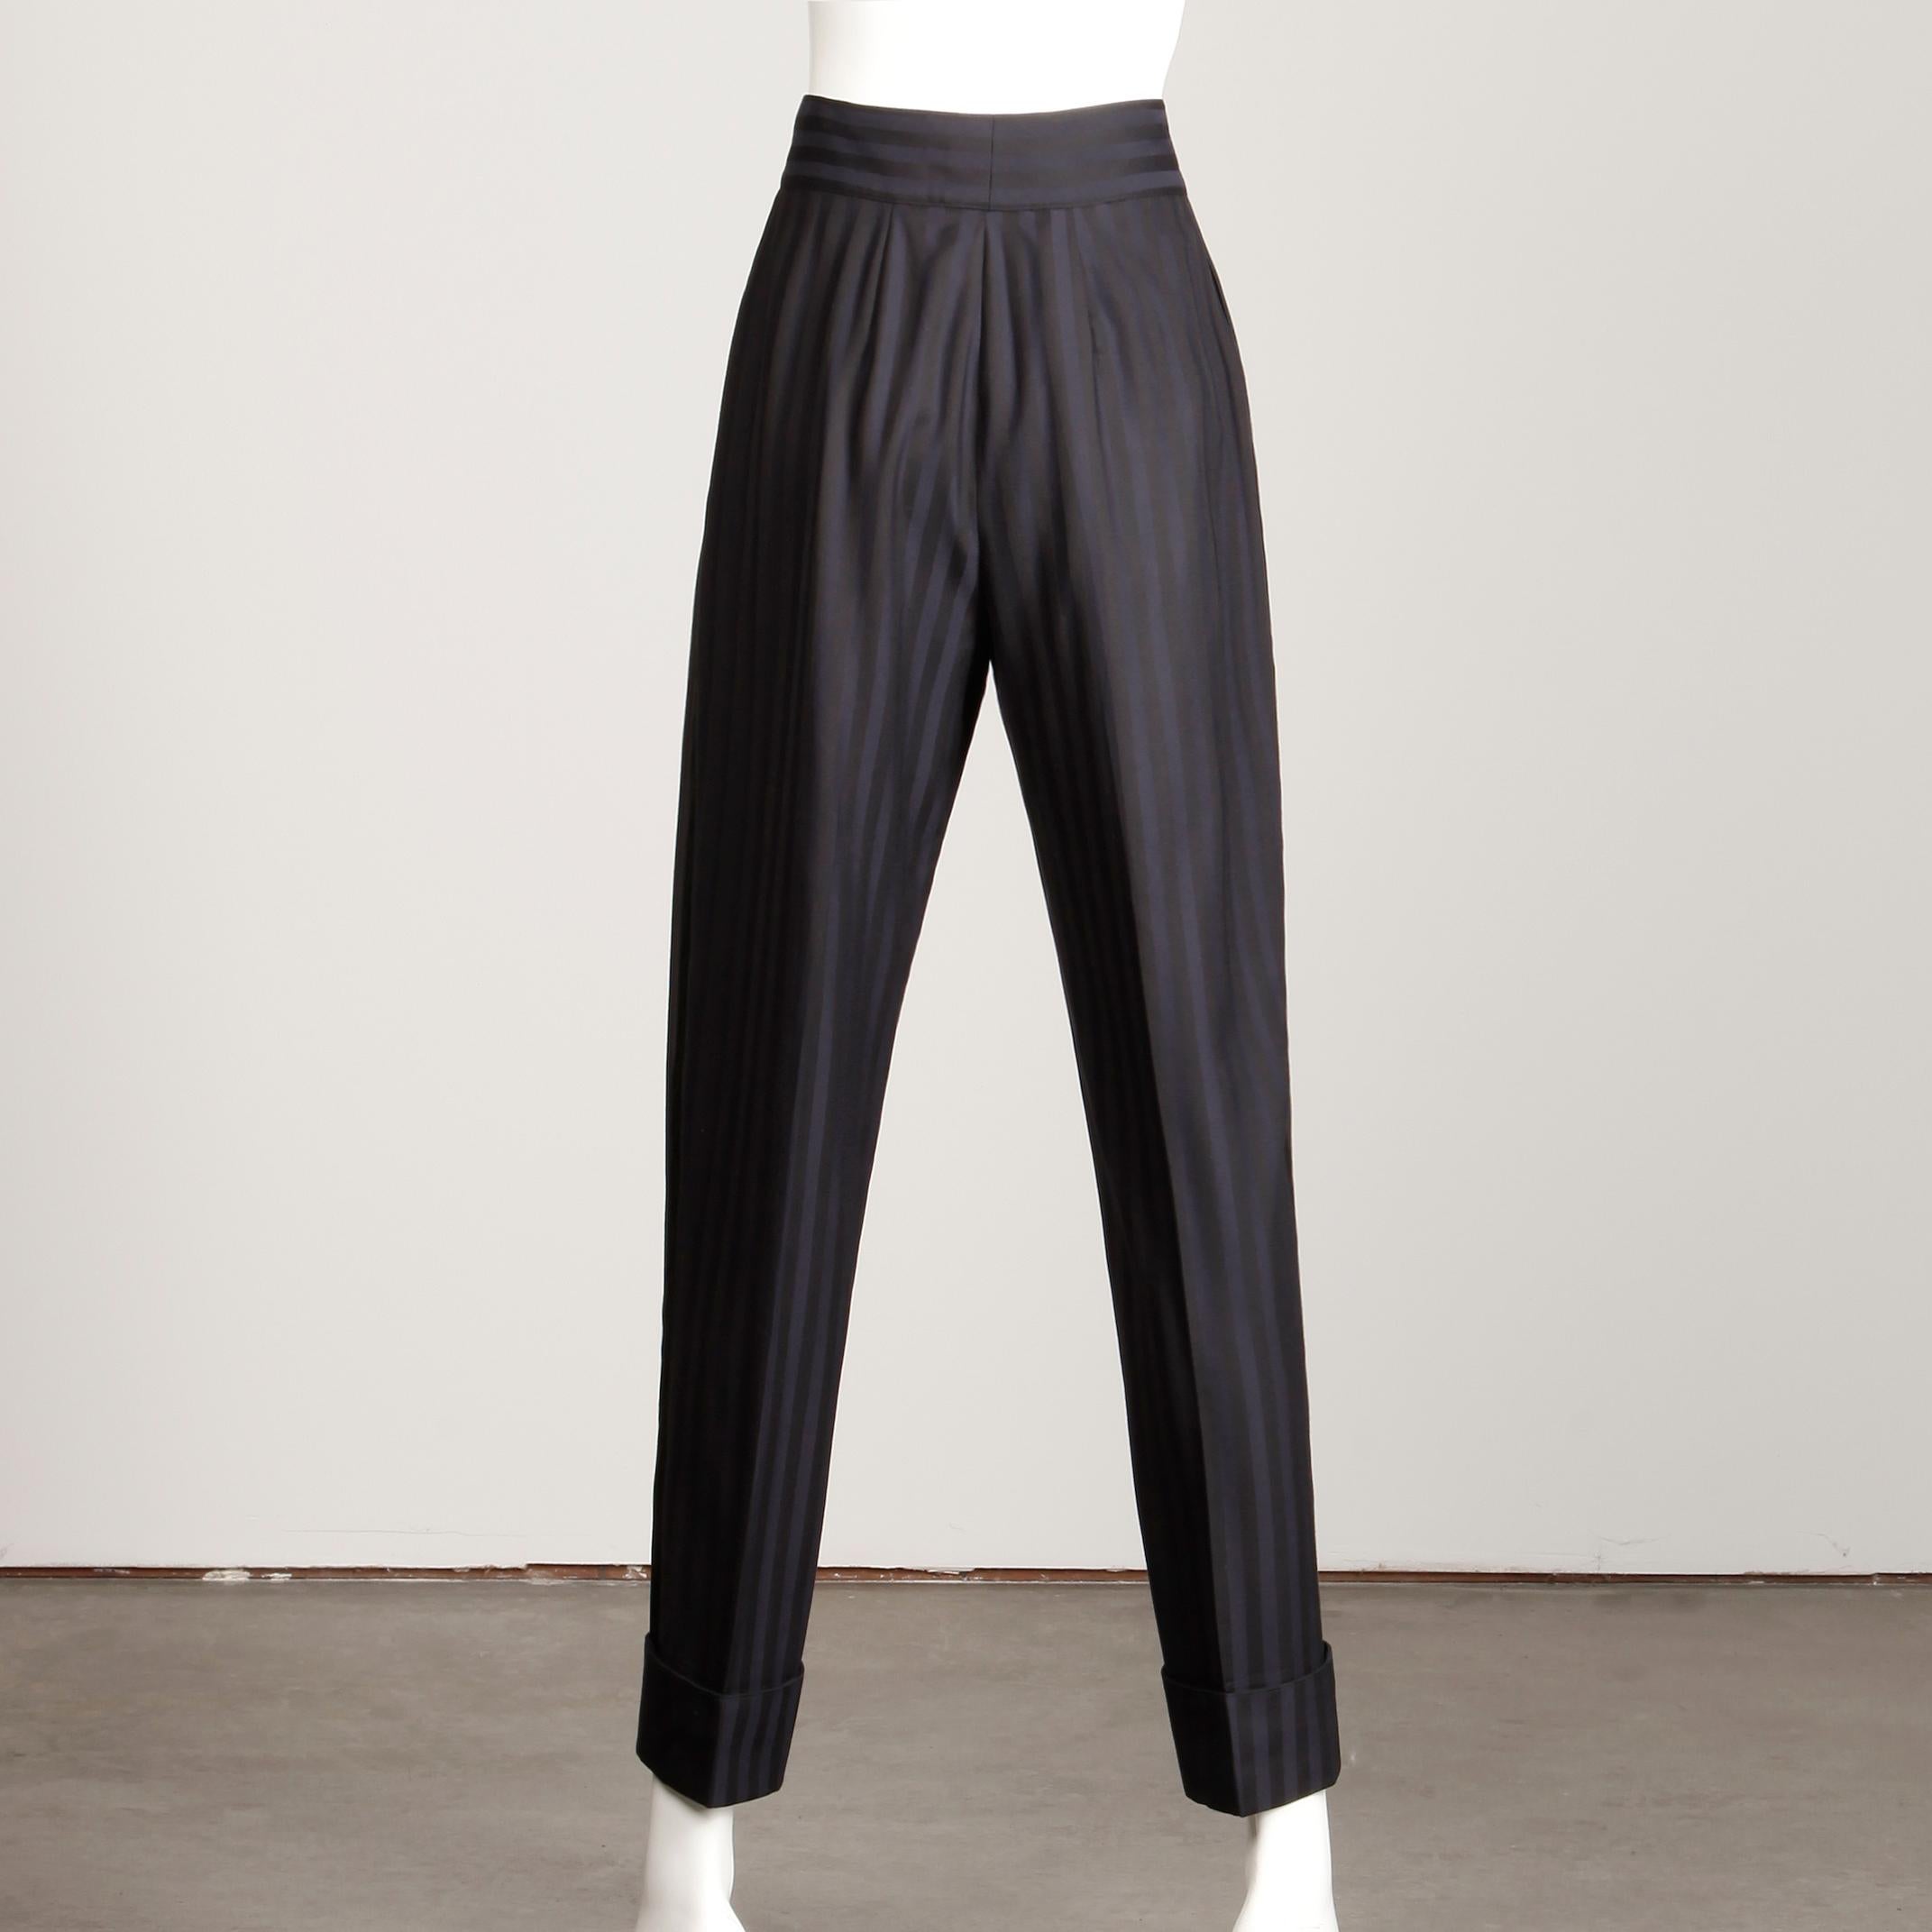 Claude Montana 1980s Vintage Navy Blue + Black Striped Wool Pants or Trousers 5